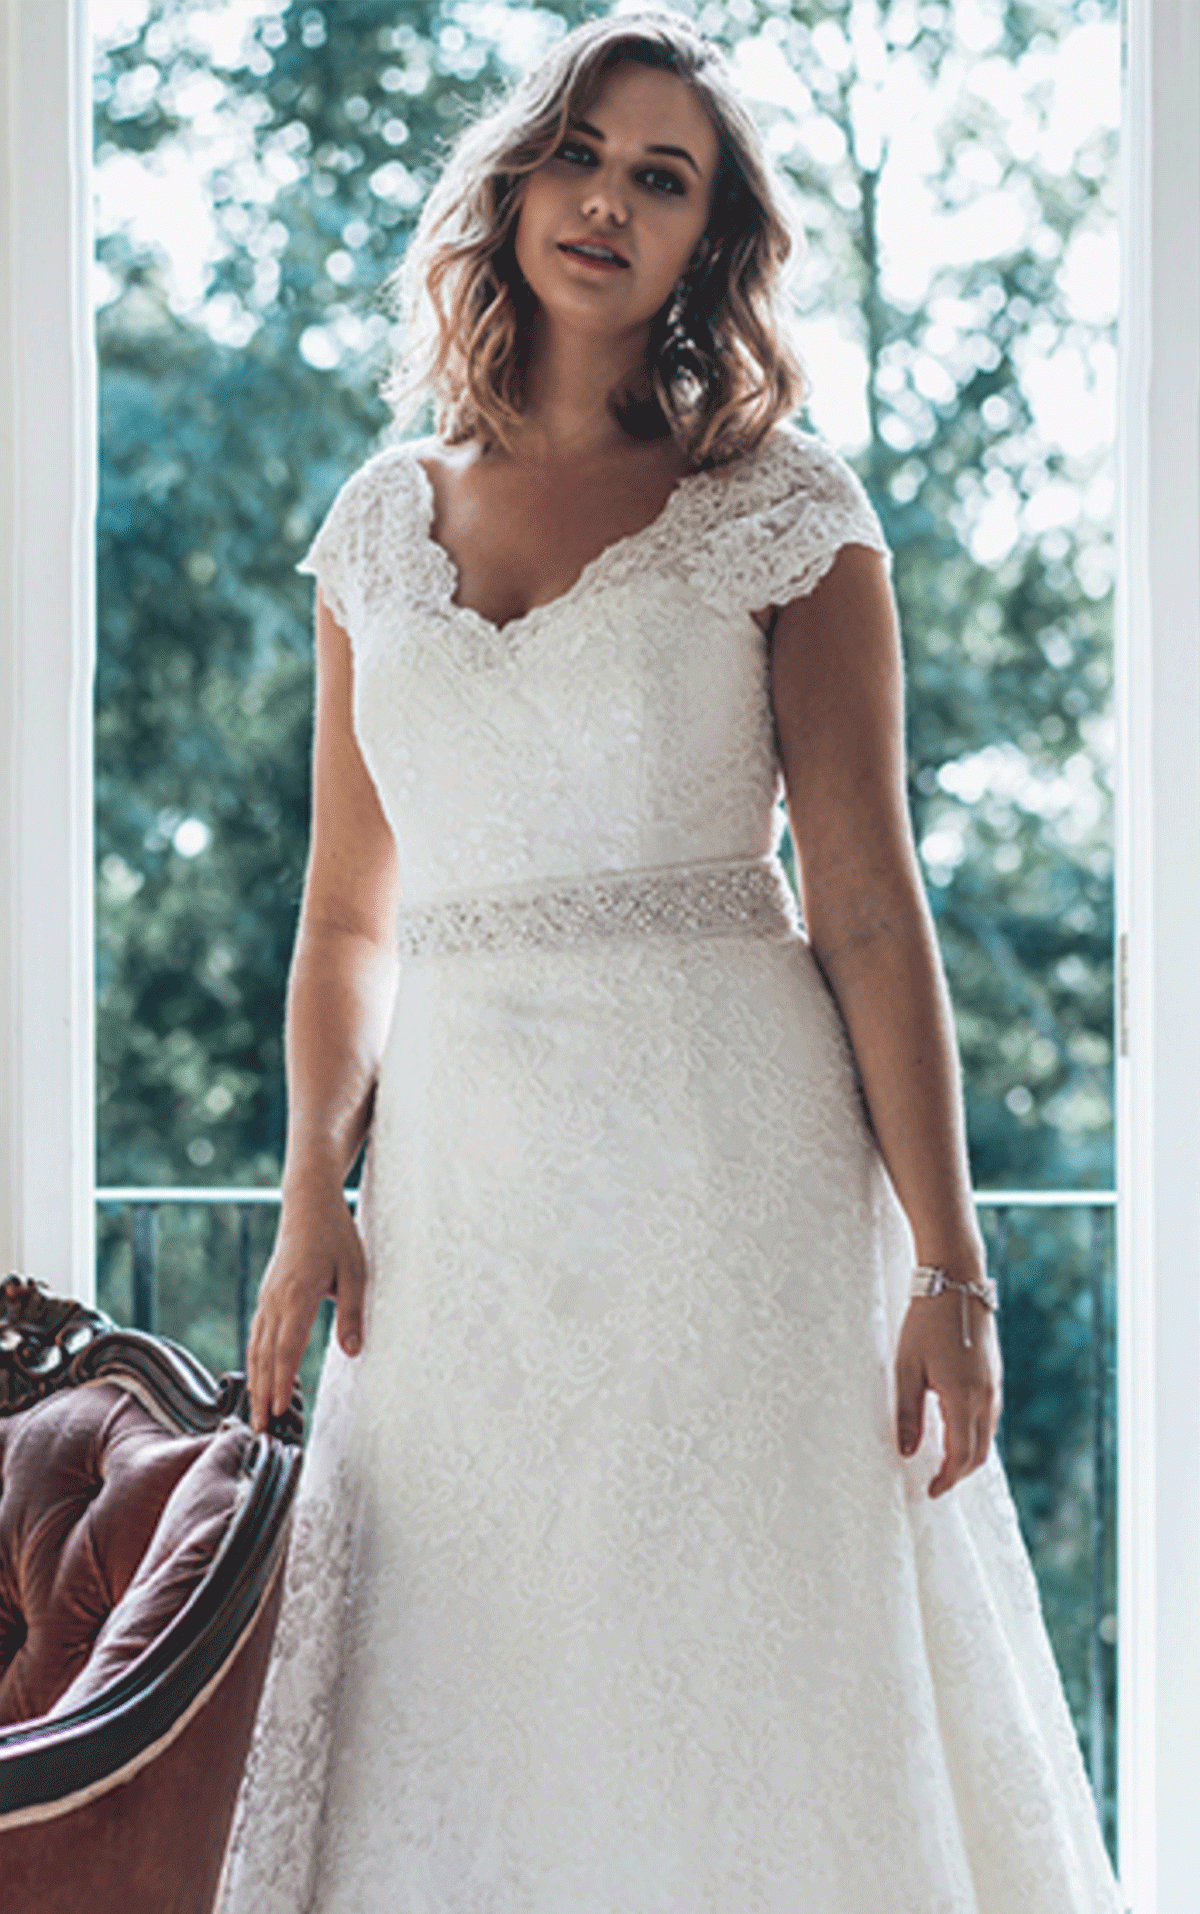 White Rose Madison May - Size 24 - Natural Lace A-line wedding dress with Cap sleeves and High back - Now on sale at Blessings Wedding Dress  Boutique, Brighton. 3 Loyal Parade, Mill Rise, Westdene, Brighton. BN1 5GG T: 01273 505766 E: info@blessingsbridal.co.uk